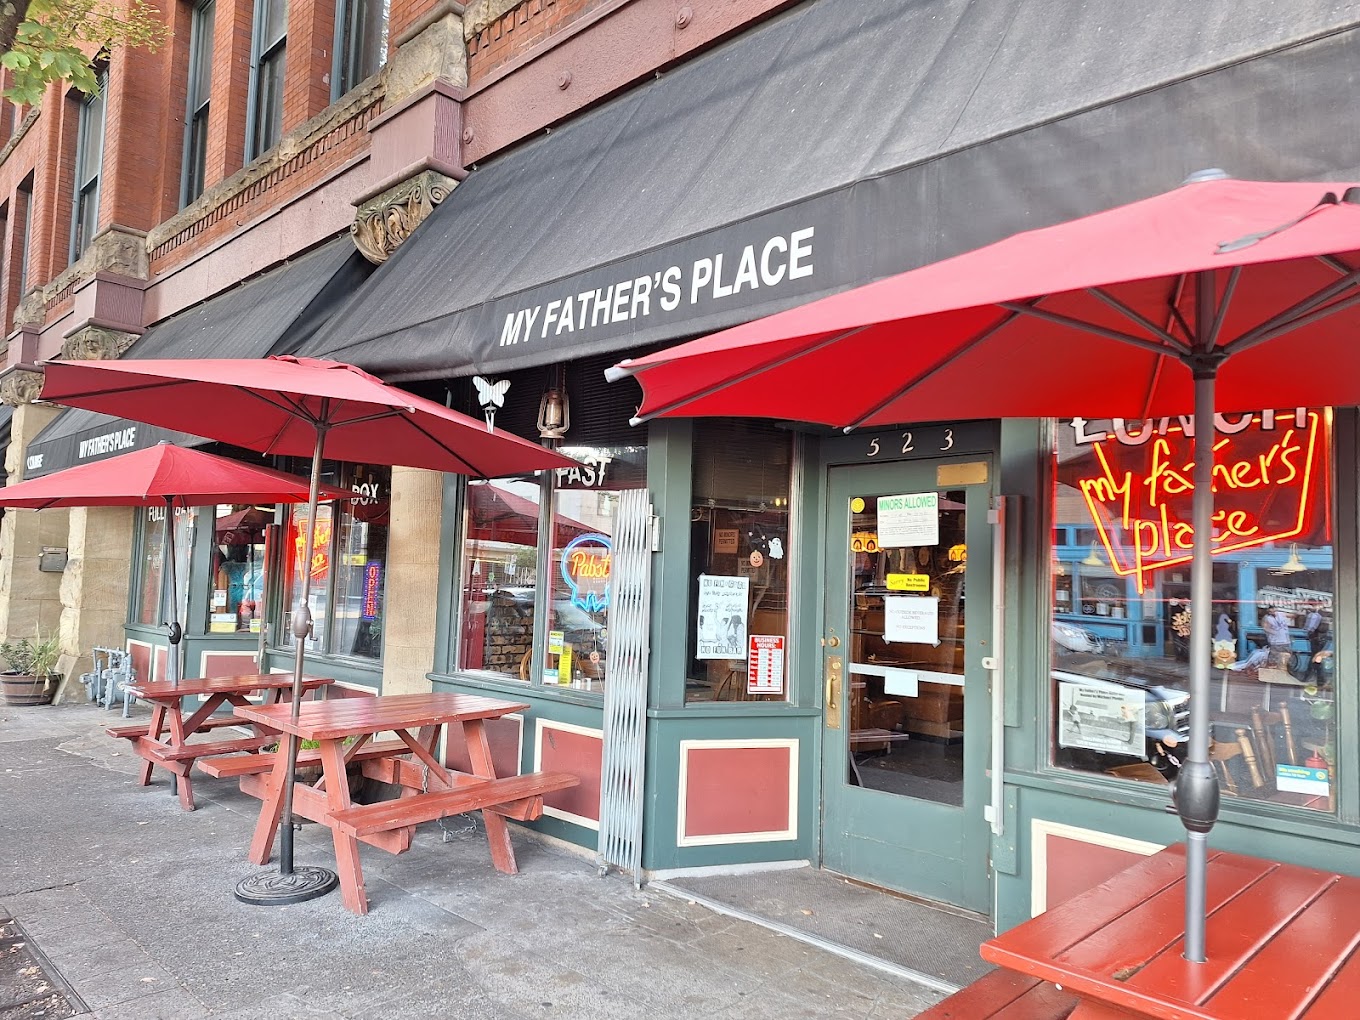 The outside of My Father's Place in Portland, Oregon. It has a black awning with white letters, and there are red picnic tables and red umbrellas out front on the sidewalk.